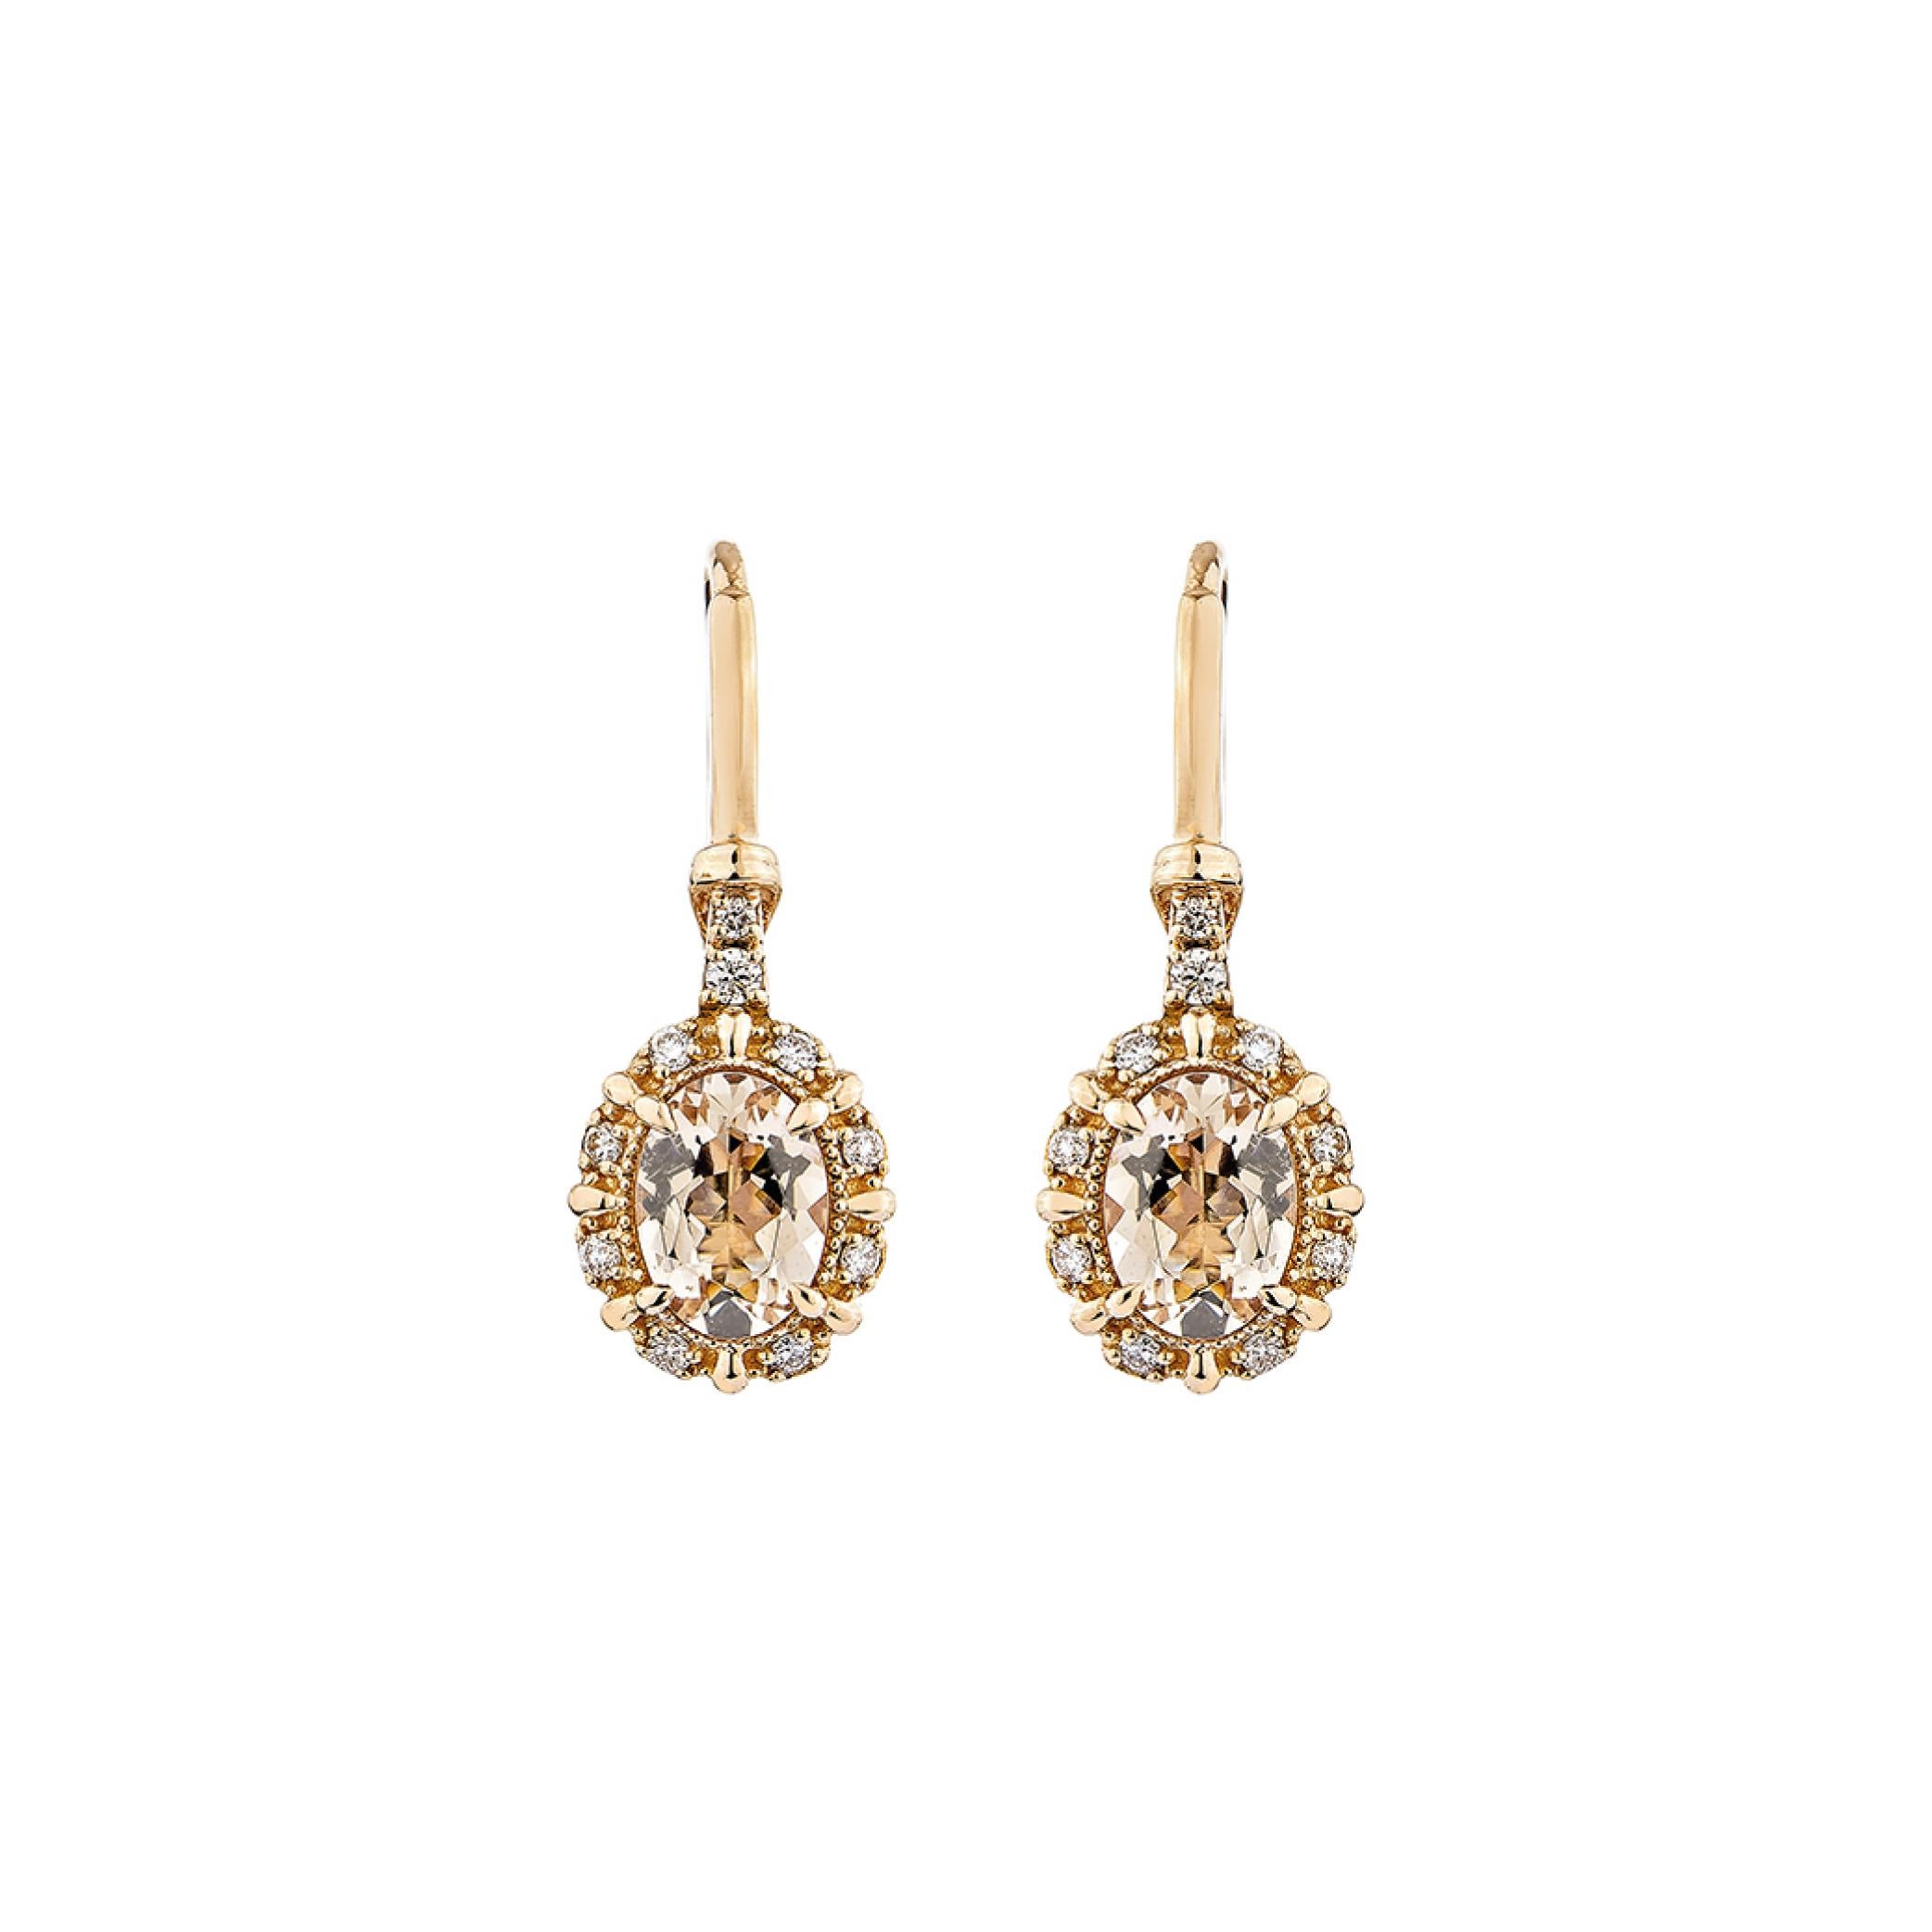 Contemporary 1.20 Carat Morganite Lever Back Earring in 18Karat Rose Gold with White Diamond. For Sale